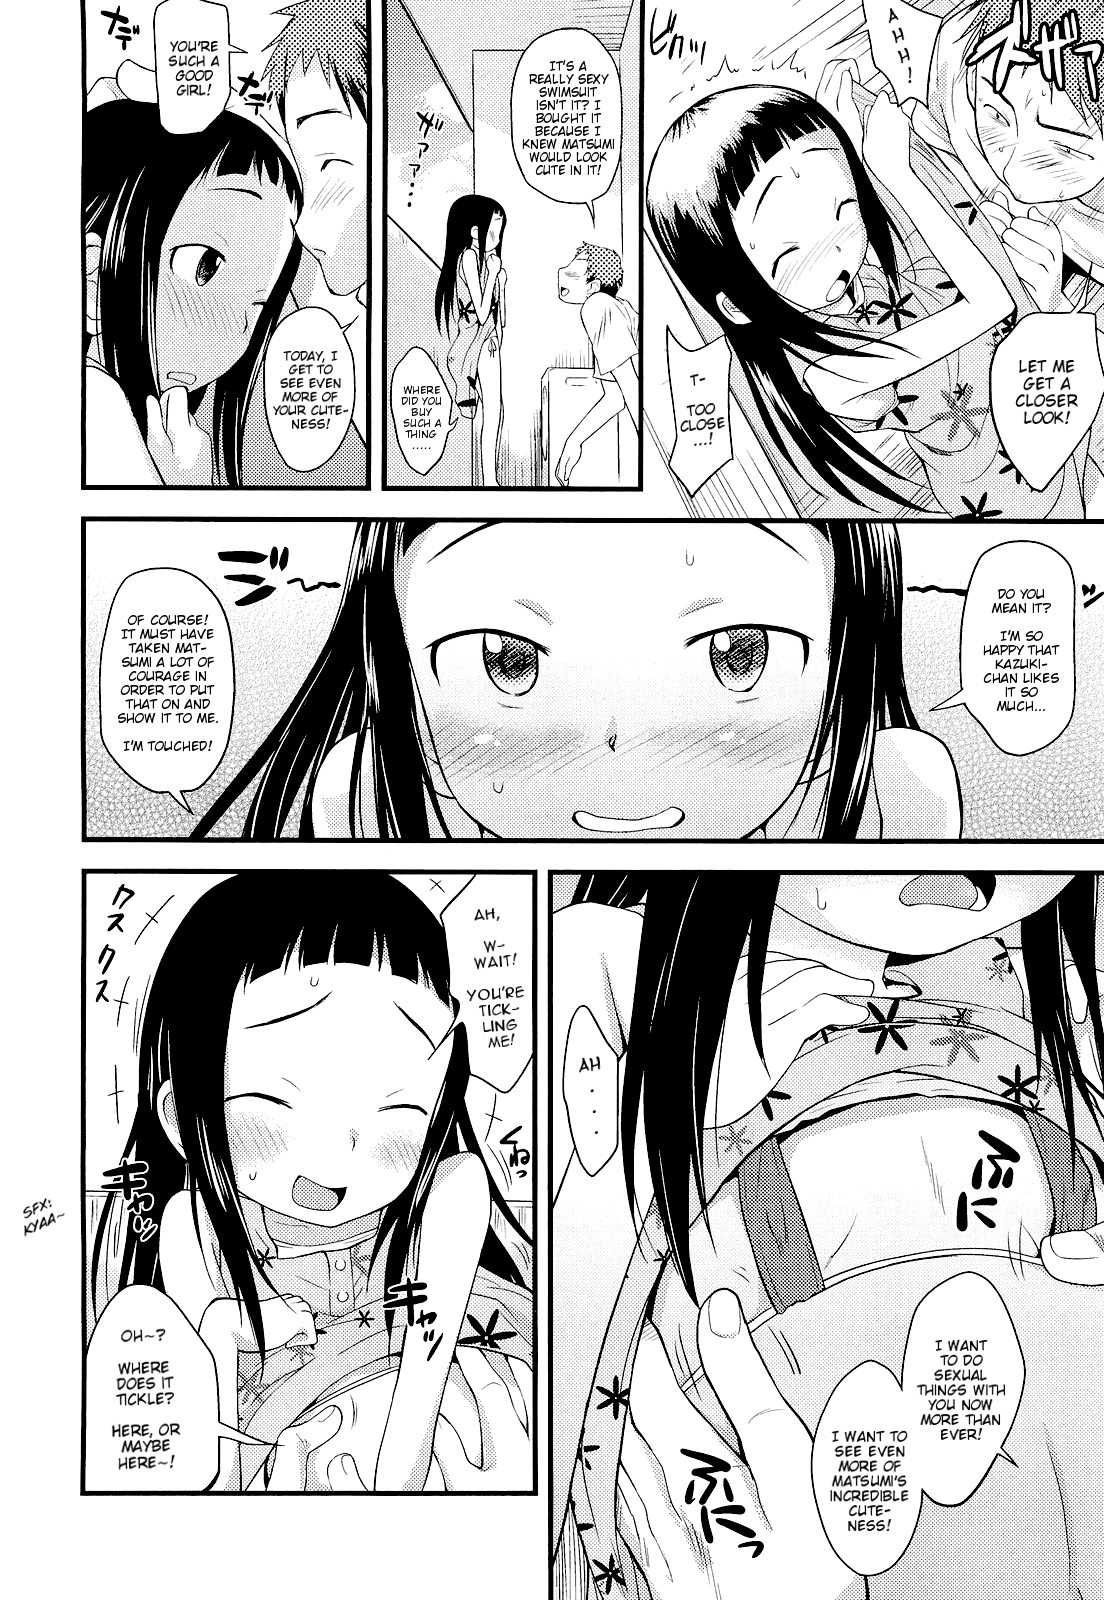 [Nohri Isawa] Futari no Tokubetsu nao Heya (A Special Room for Two people) [ENG] [Mistvern] page 4 full